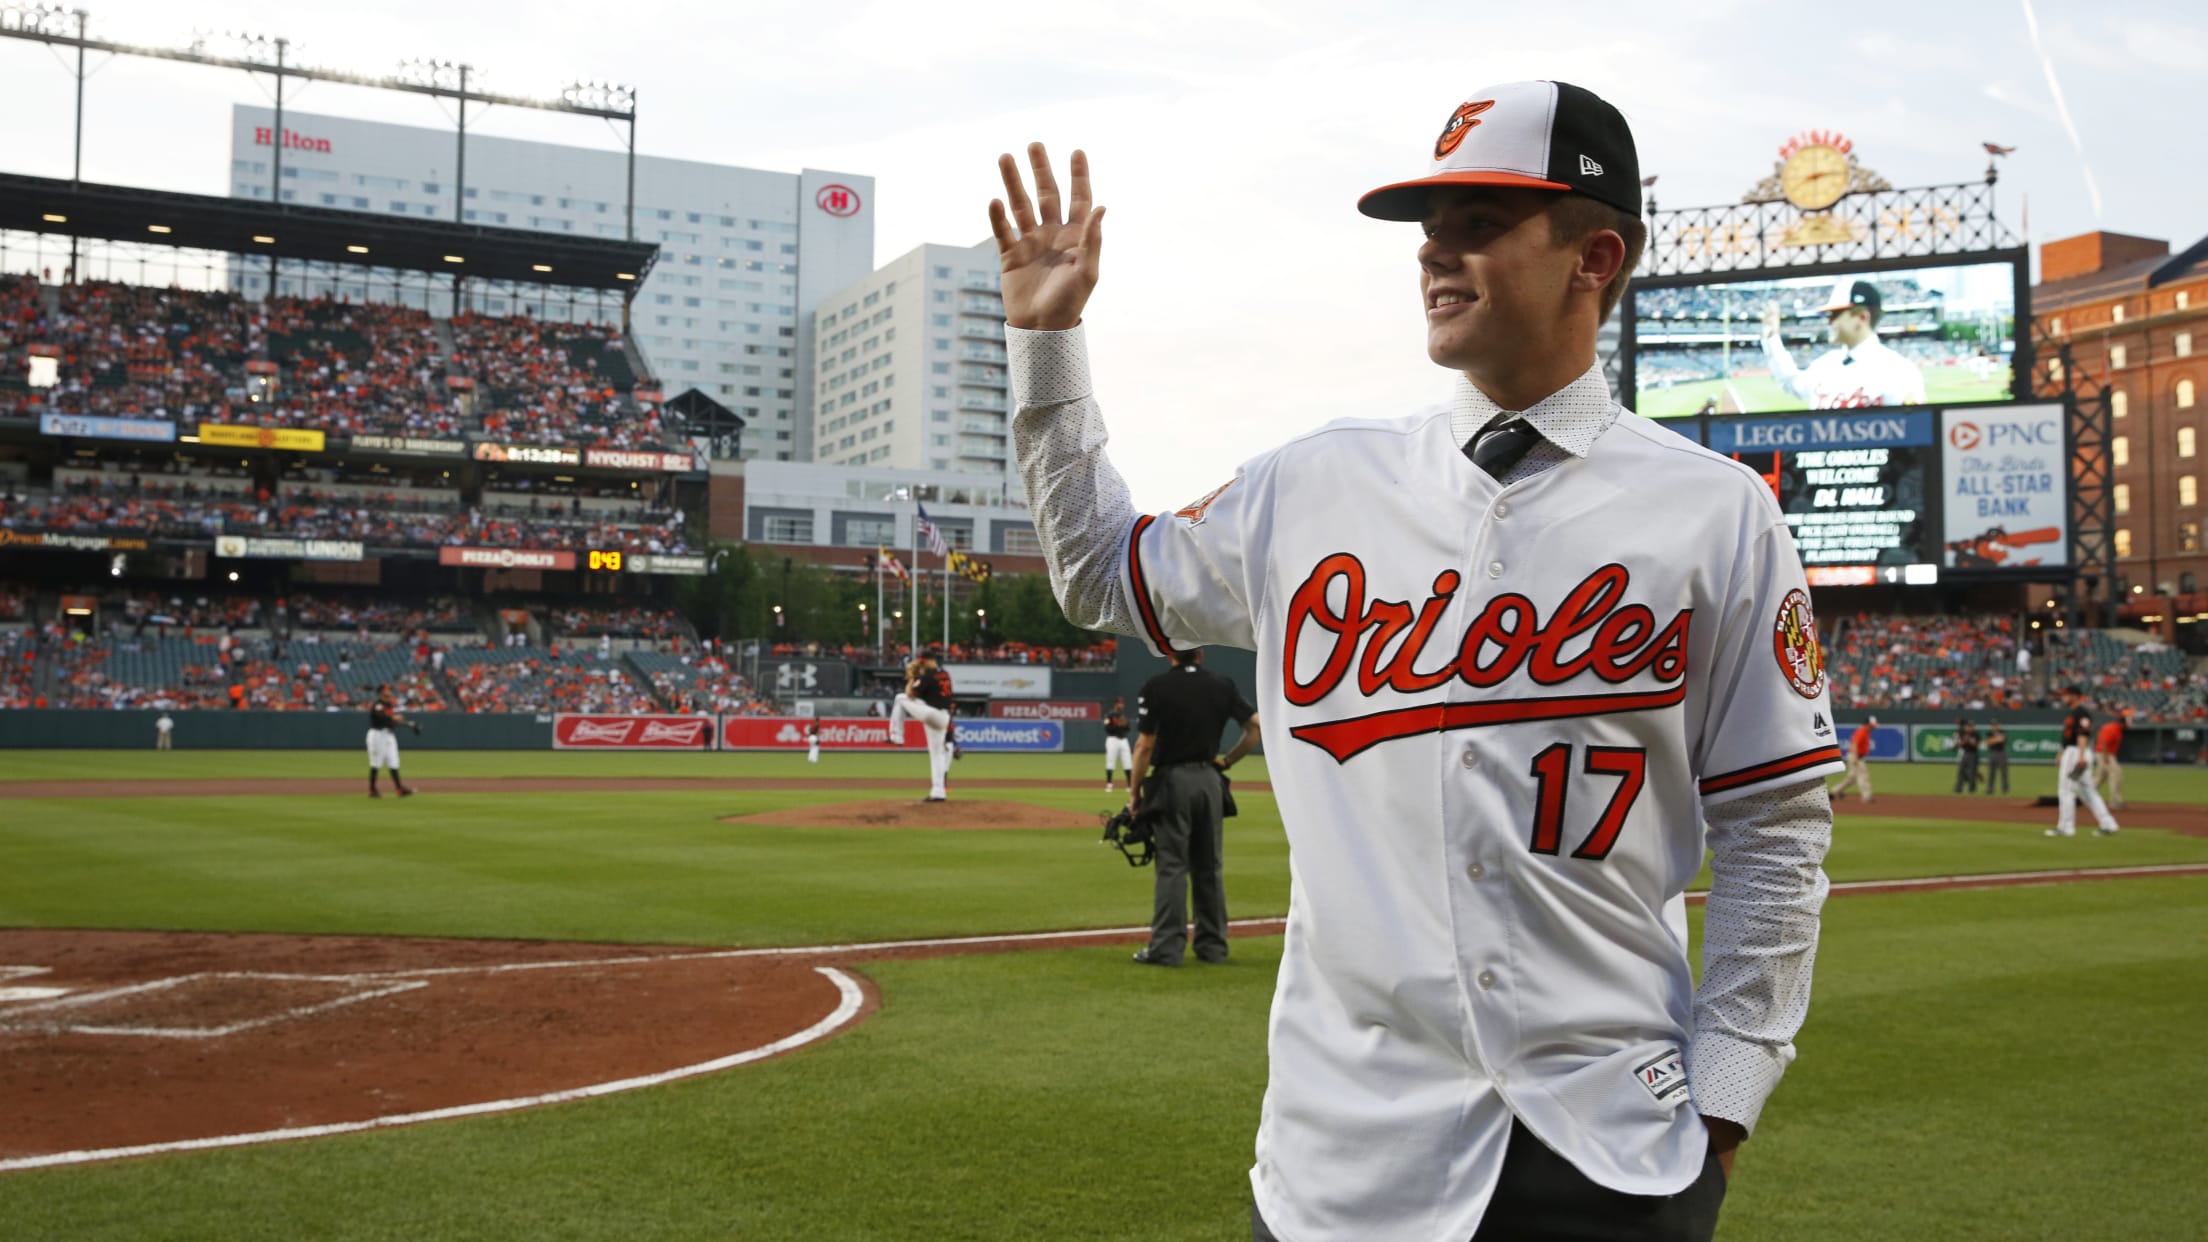 Hall waving to fans during the game in 2017. Hall had earlier signed his paperwork to play for the Baltimore Orioles.